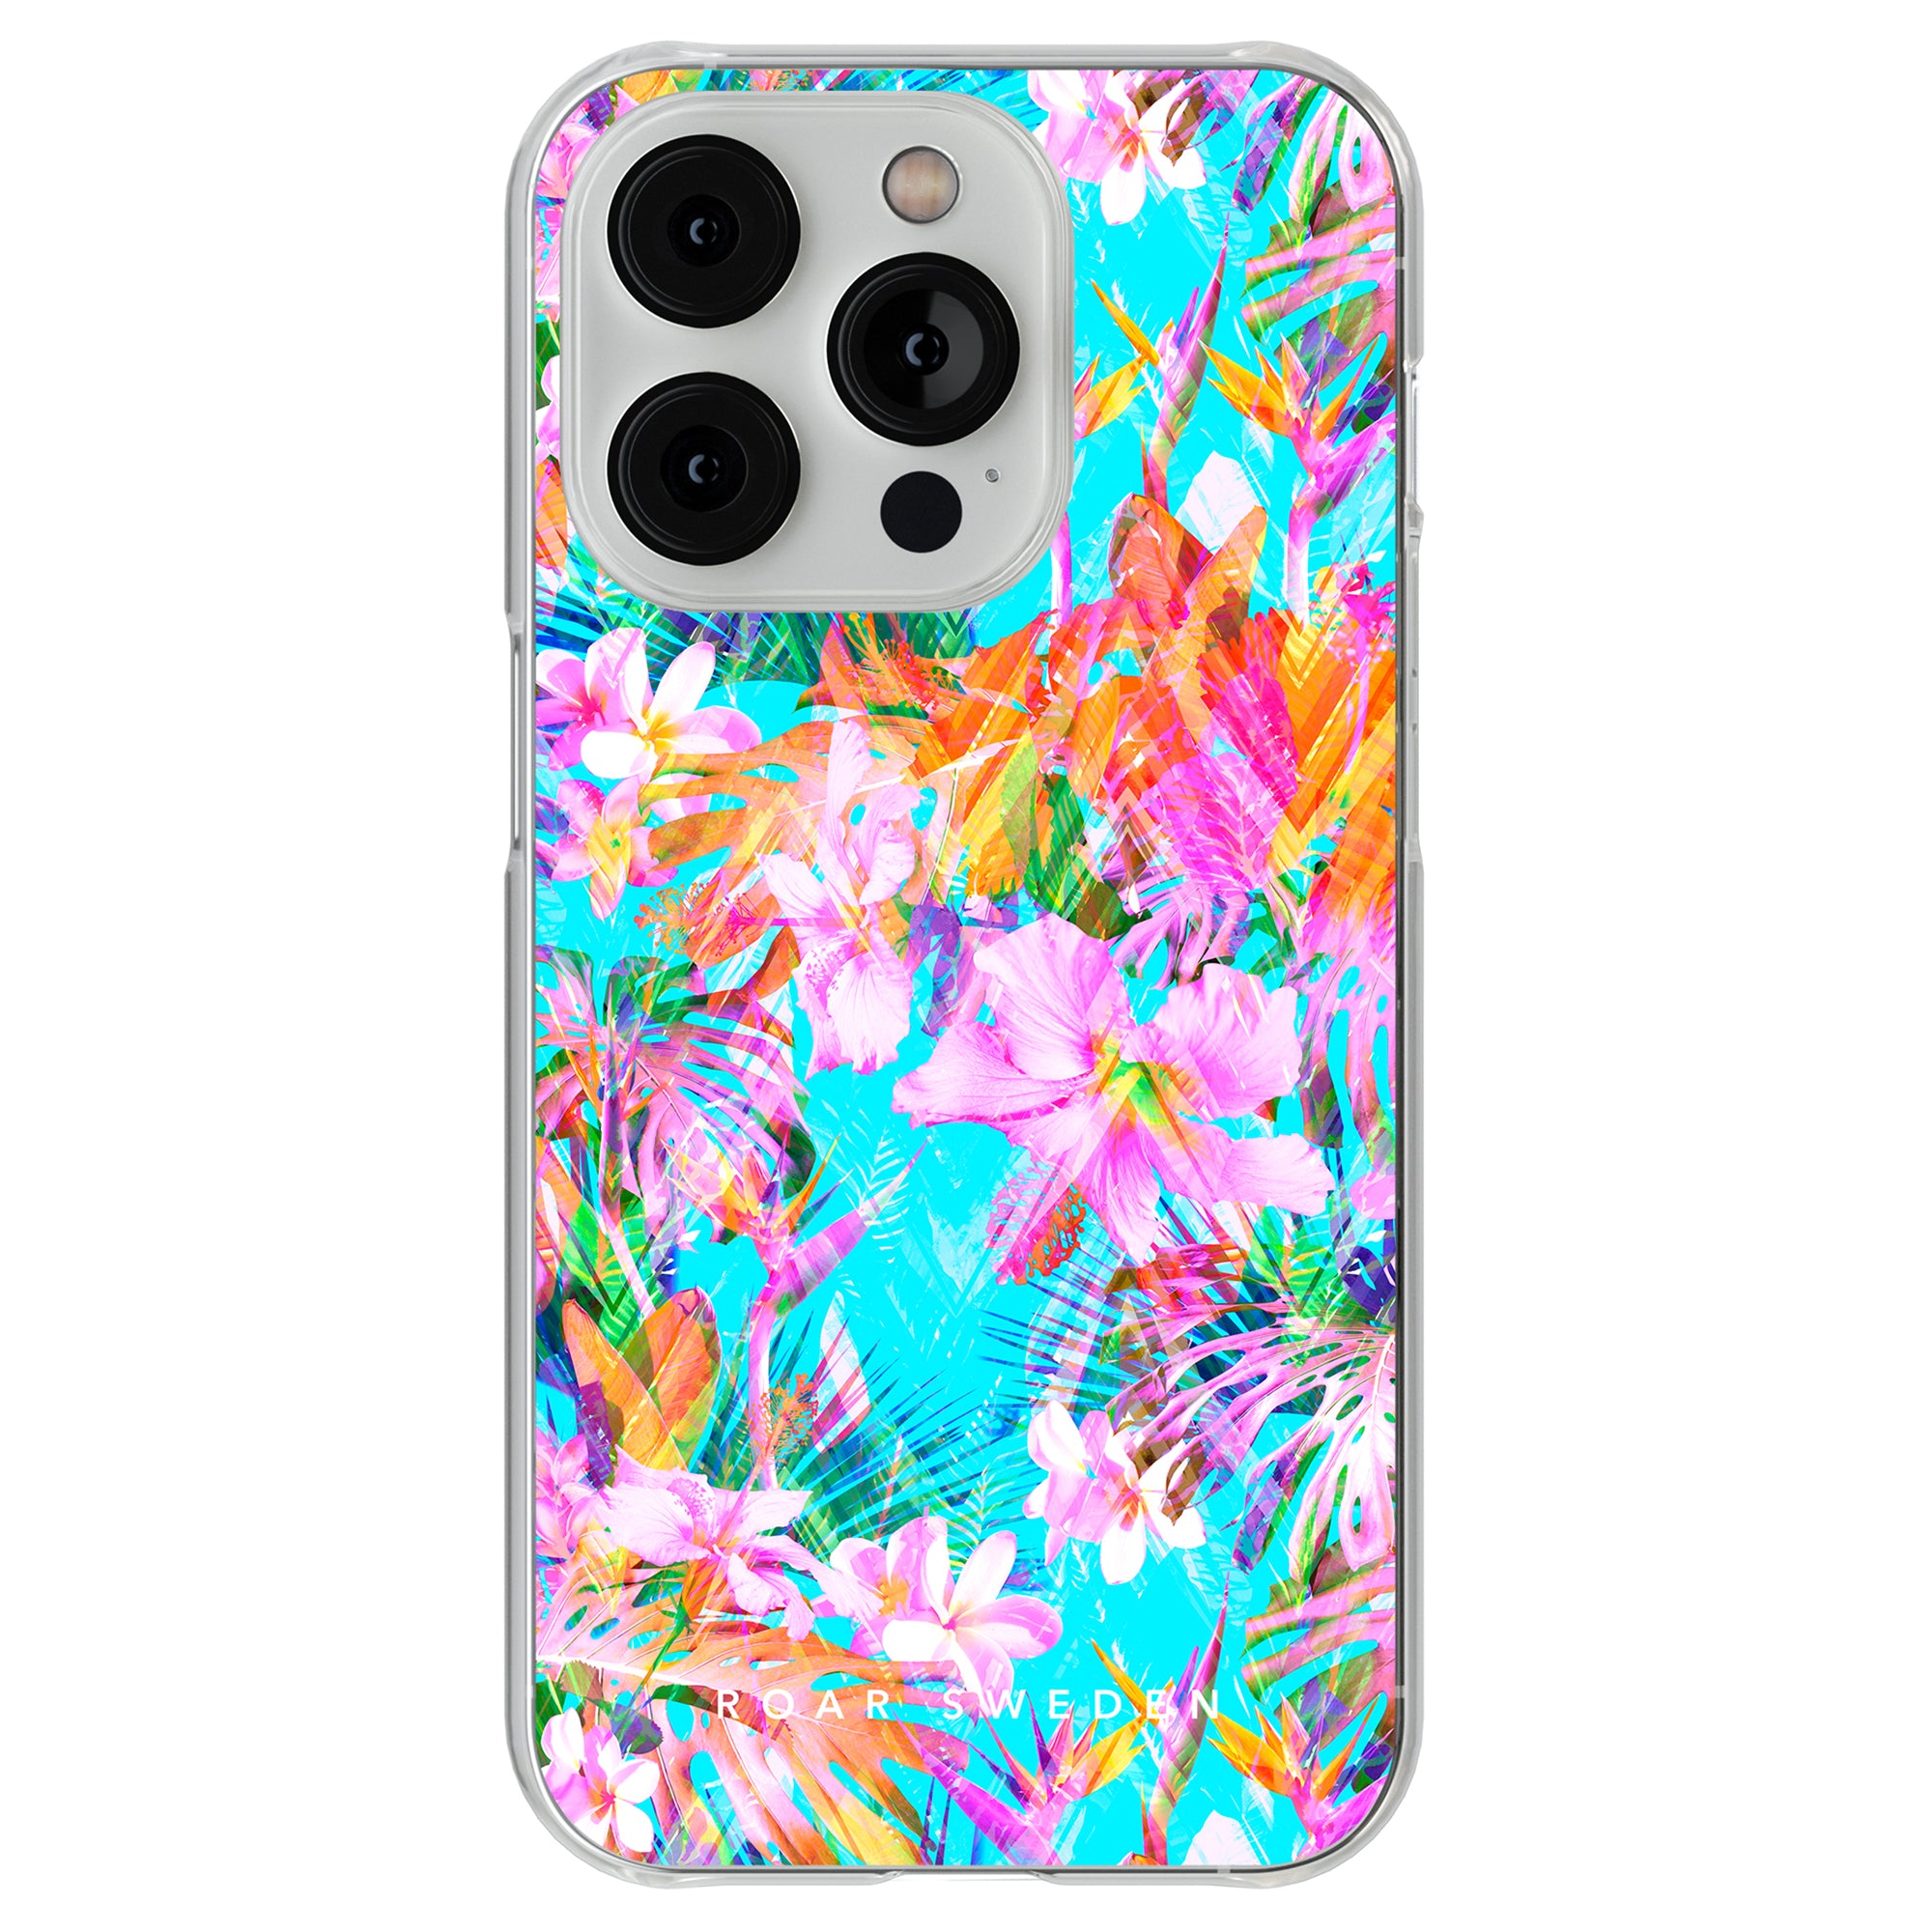 A vibrant Summer Burst - Clear Case with tropical flowers on a turkosa background.